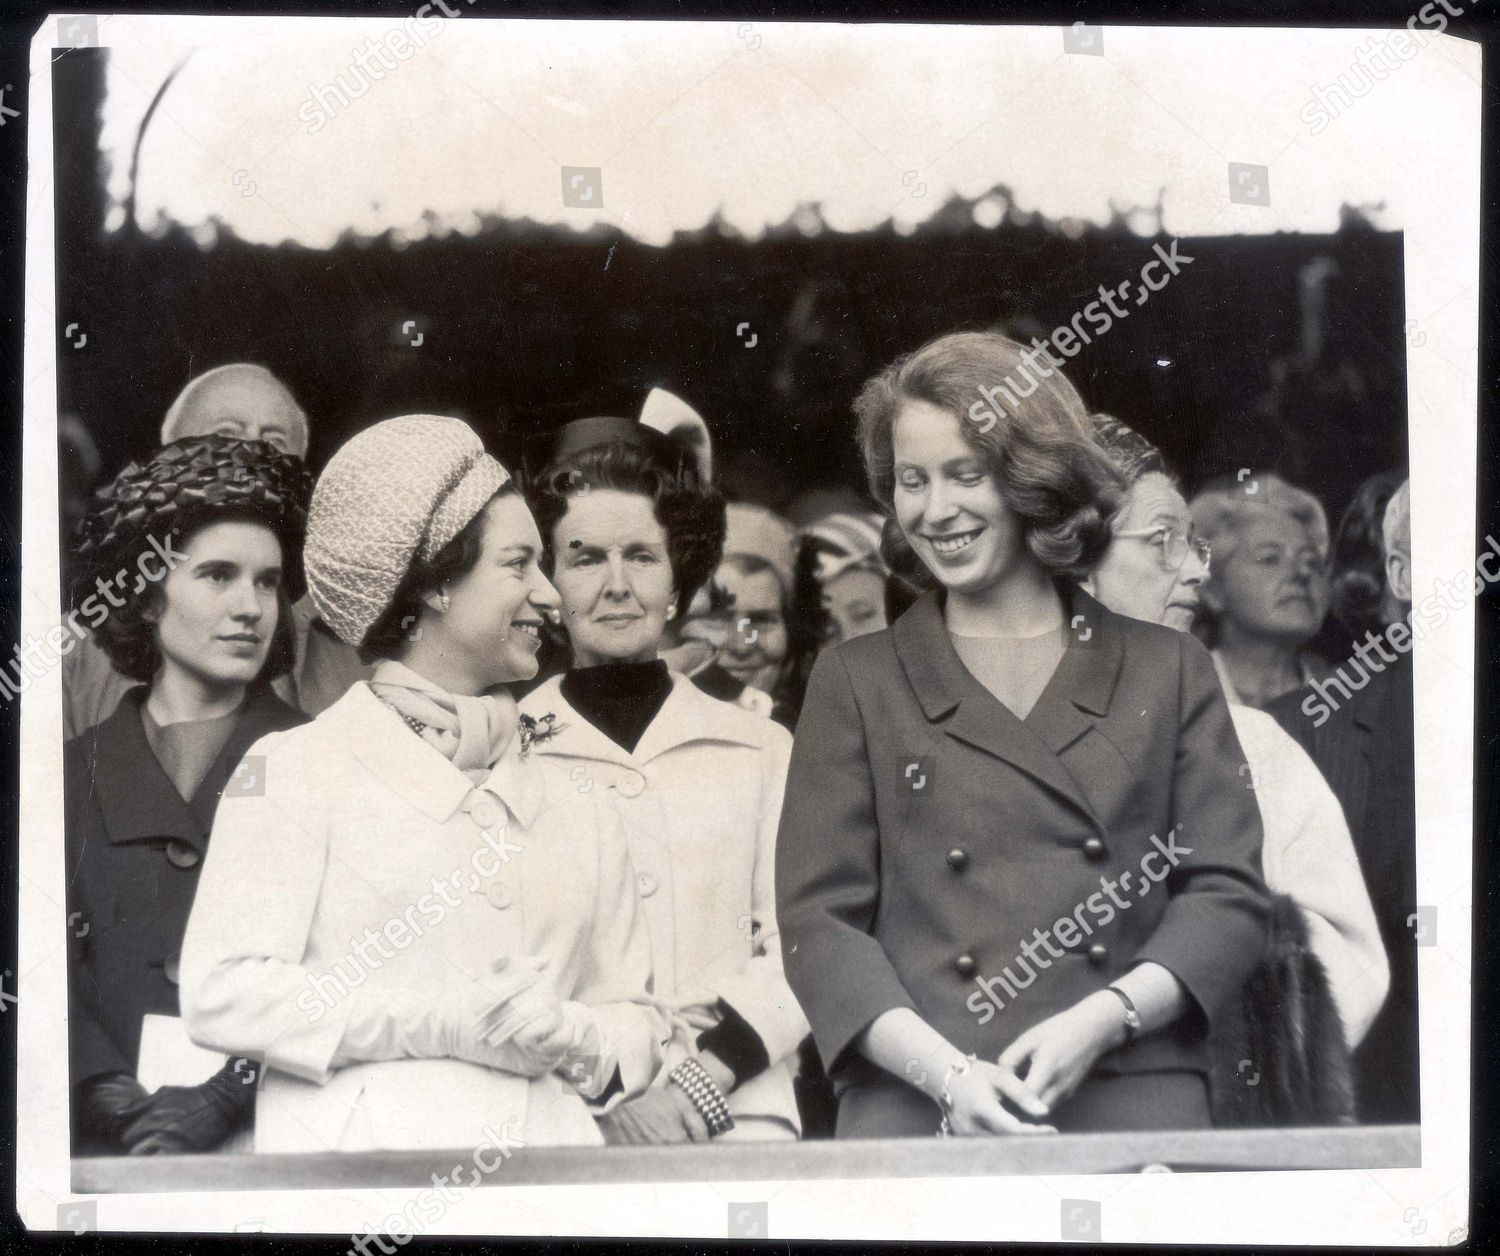 princess-margaret-turns-to-say-a-few-words-to-her-neice-princess-anne-in-the-royal-box-on-the-centre-court-at-wimbledon-today-friday-when-they-say-australias-roy-emerson-beat-fellow-countryman-fred-stolle-in-the-mens-singles-final-1965-shutterstock-editorial-896457a.jpg